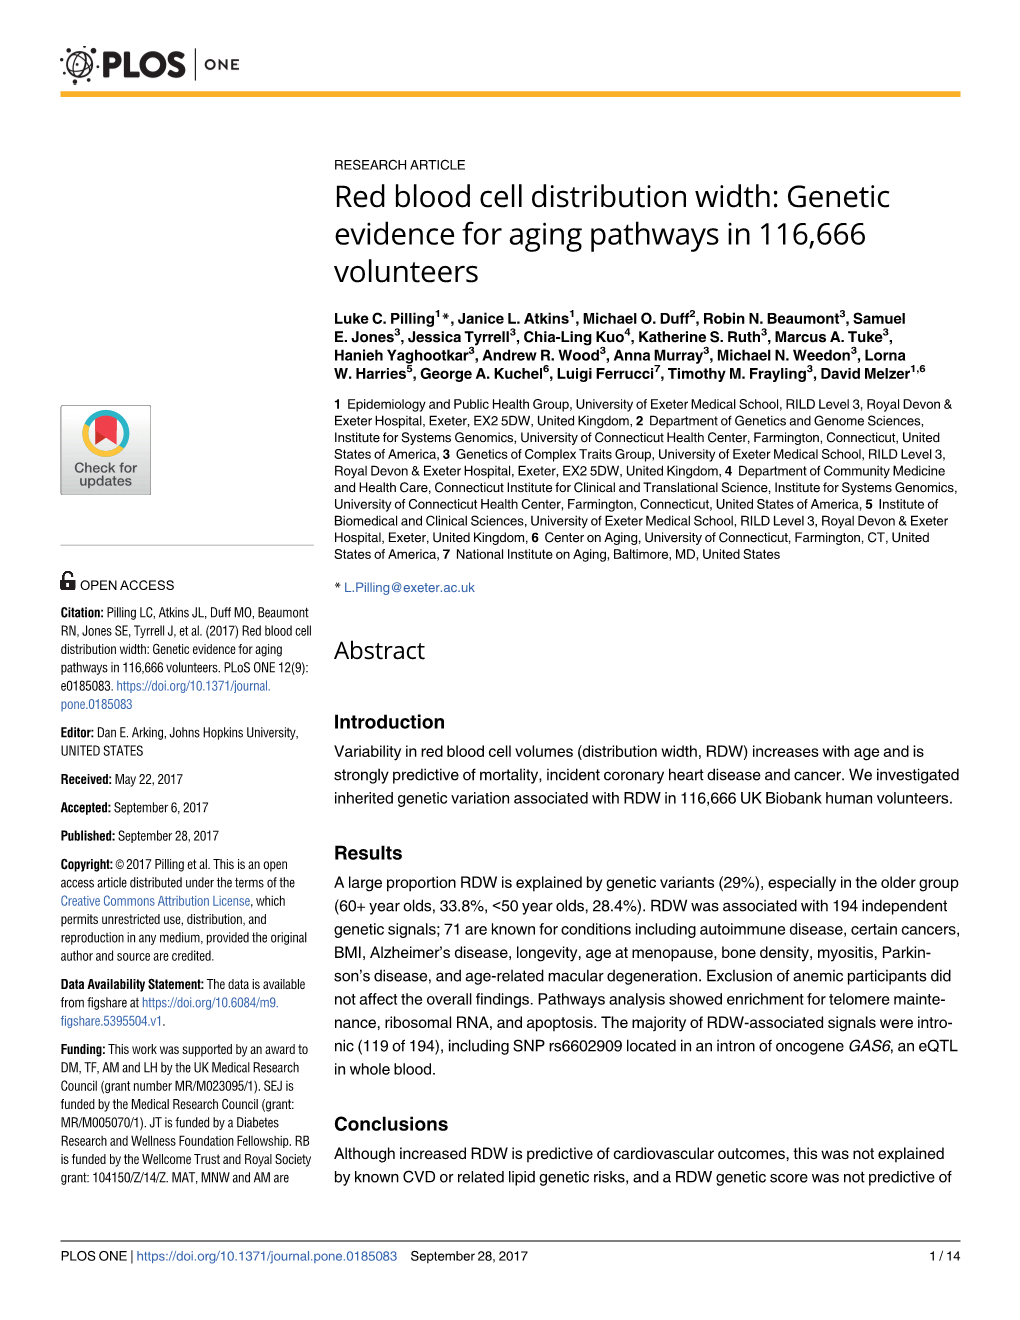 Red Blood Cell Distribution Width: Genetic Evidence for Aging Pathways in 116,666 Volunteers